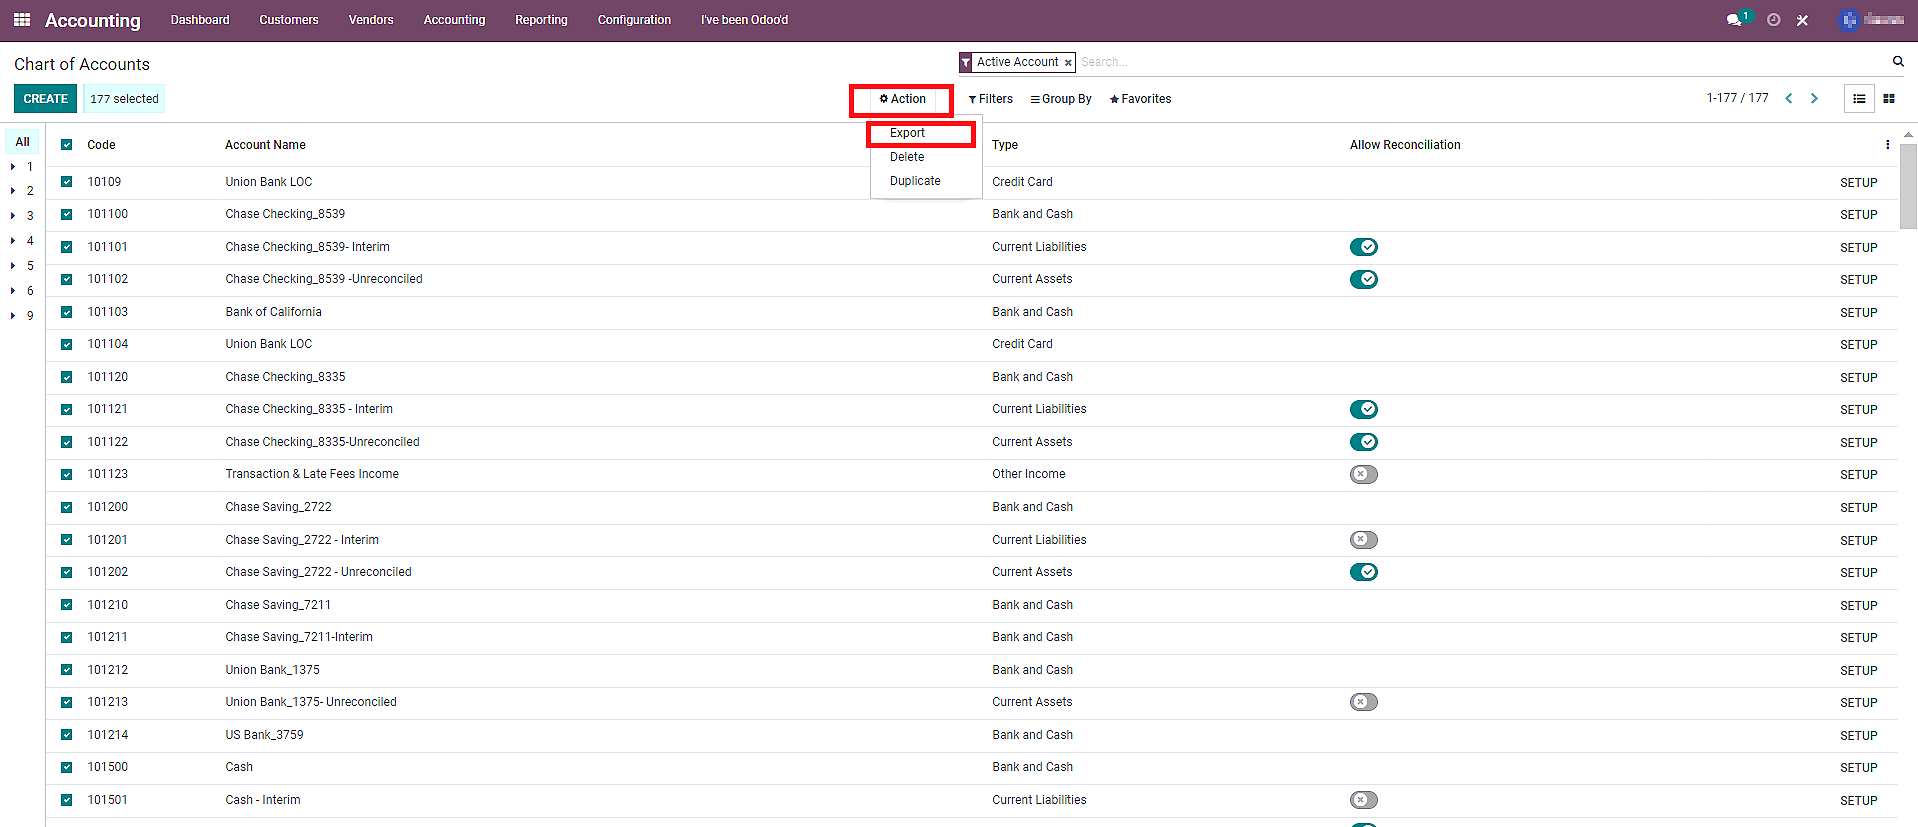 chart of accounts odoo Click on the “Action” button > “Export”.